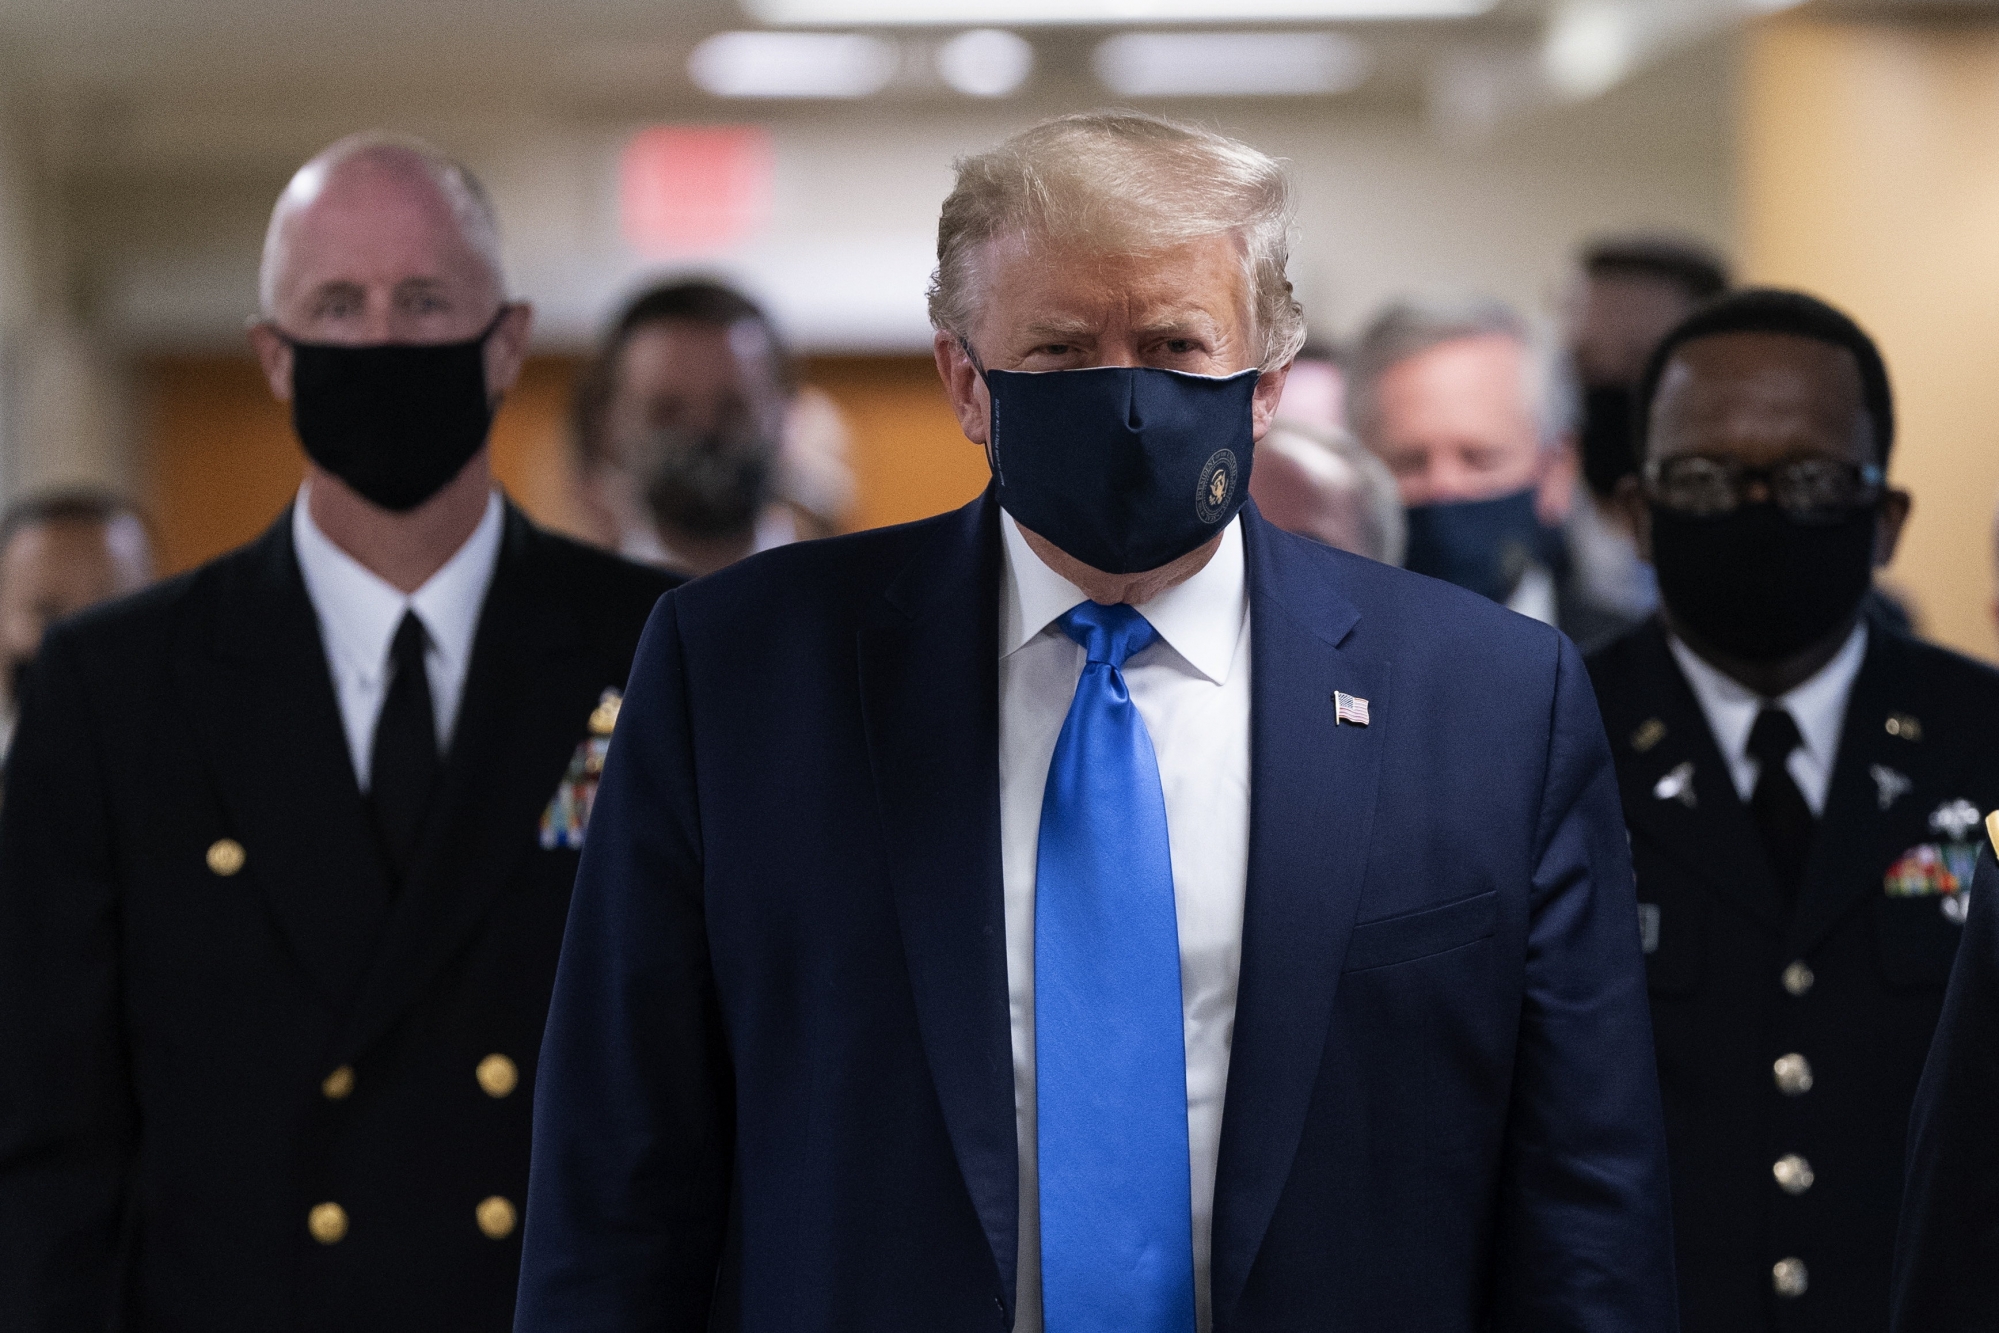 epa08541231 US President Donald J. Trump (C) wears a face mask as he arrives to visit with wounded military members and front line coronavirus healthcare workers at Walter Reed National Military Medical Center in Bethesda, Maryland, USA, 11 July 2020.  EPA/CHRIS KLEPONIS / POOL
ArcInfo